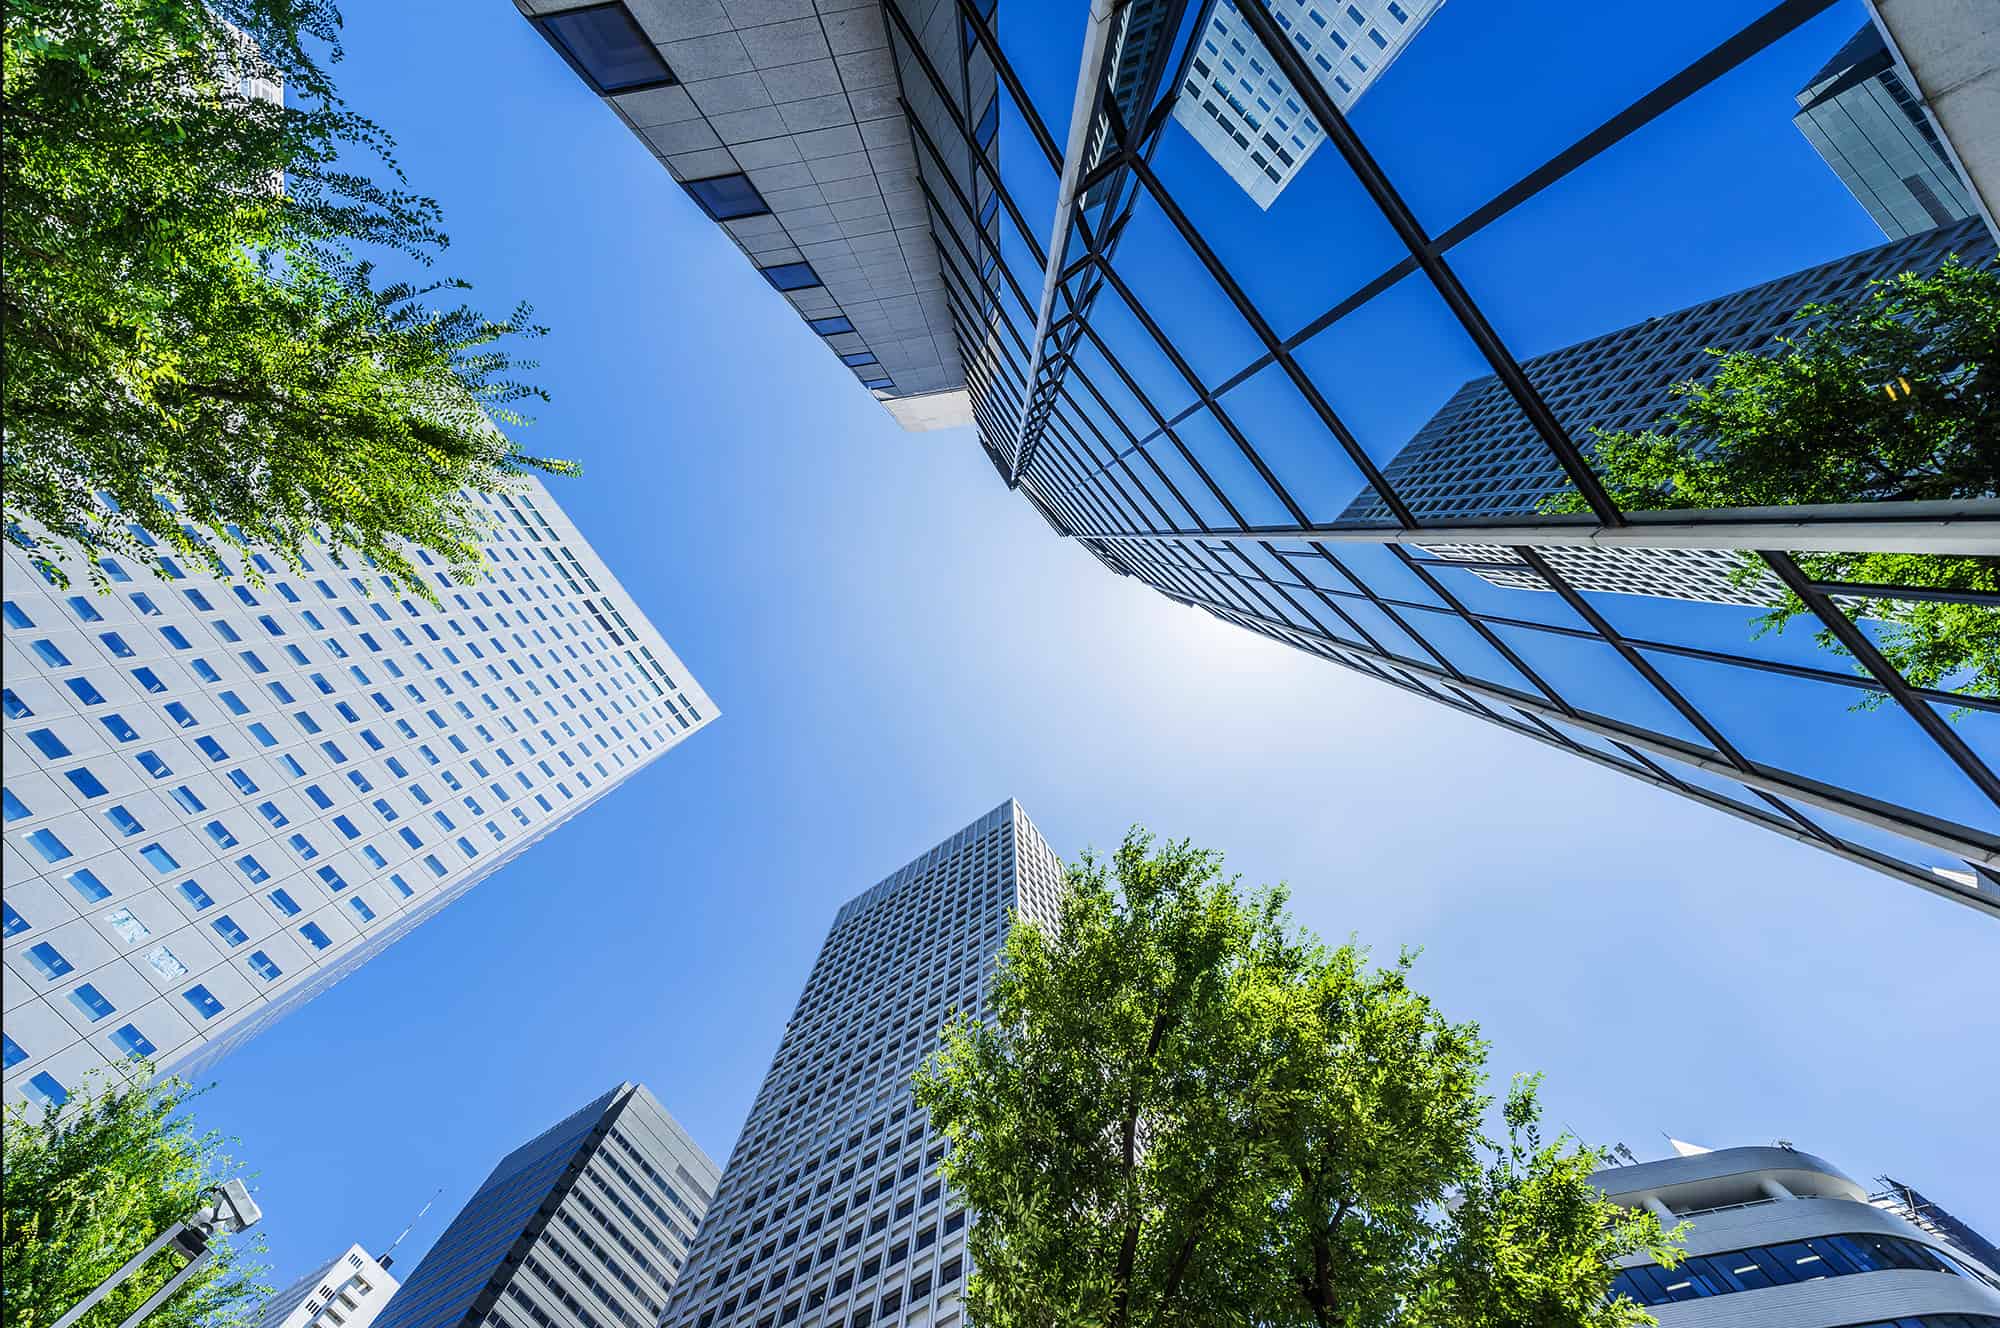 Upward view of skyscrapers framing a clear blue sky with trees in the foreground.